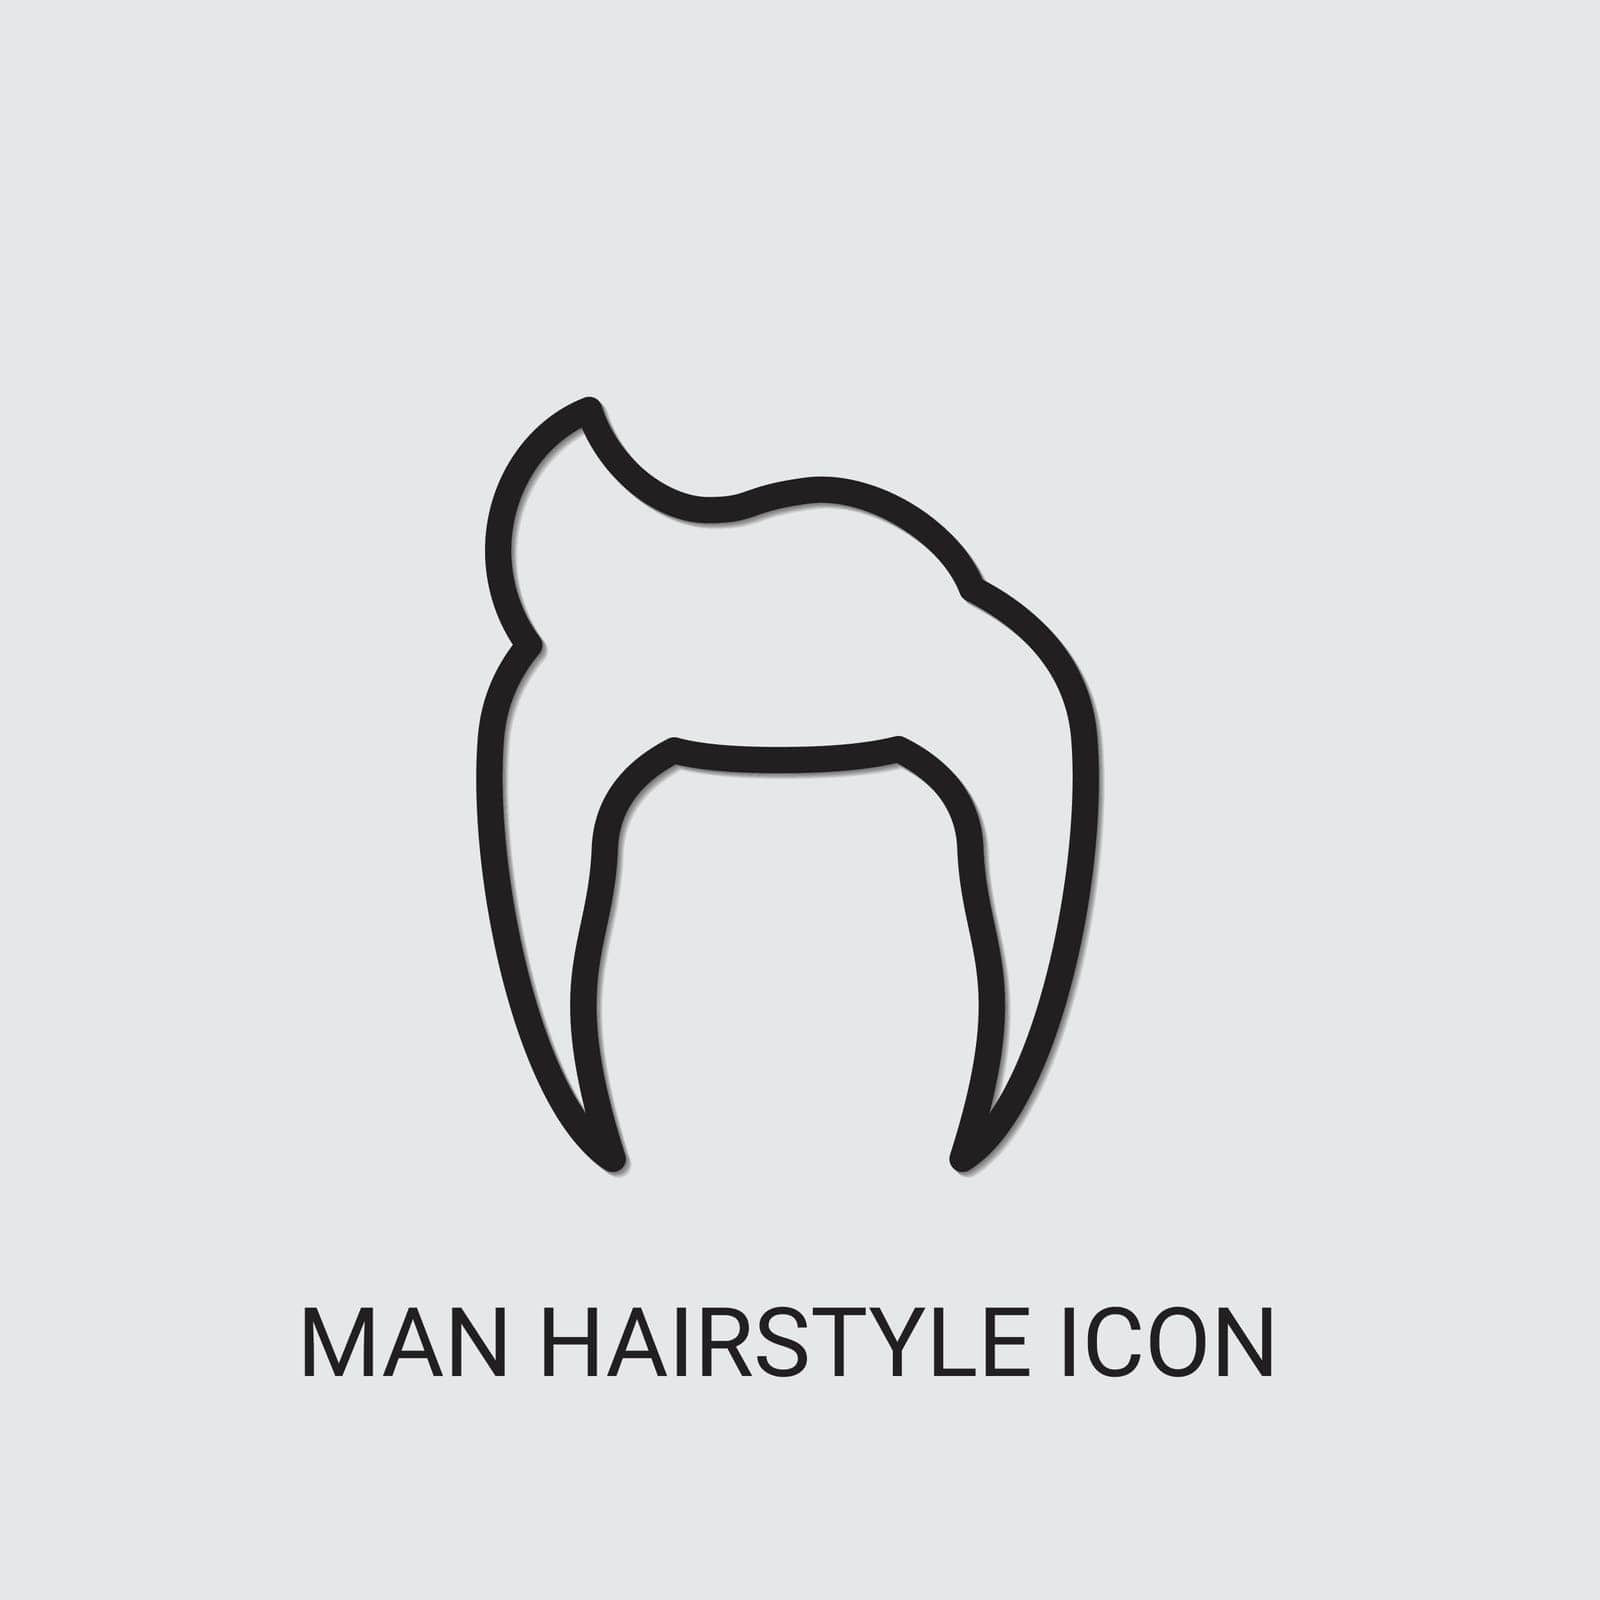 symbol,shop,icon,mustache,hair,outline,design,men,vector,man,barber,shave,facial,set,beard,retro,chop,collection,haircut,hairstyle,face,classic,goatee,silhouette,handlebar,style,illustration,disguise,male,fashion by ogqcorp